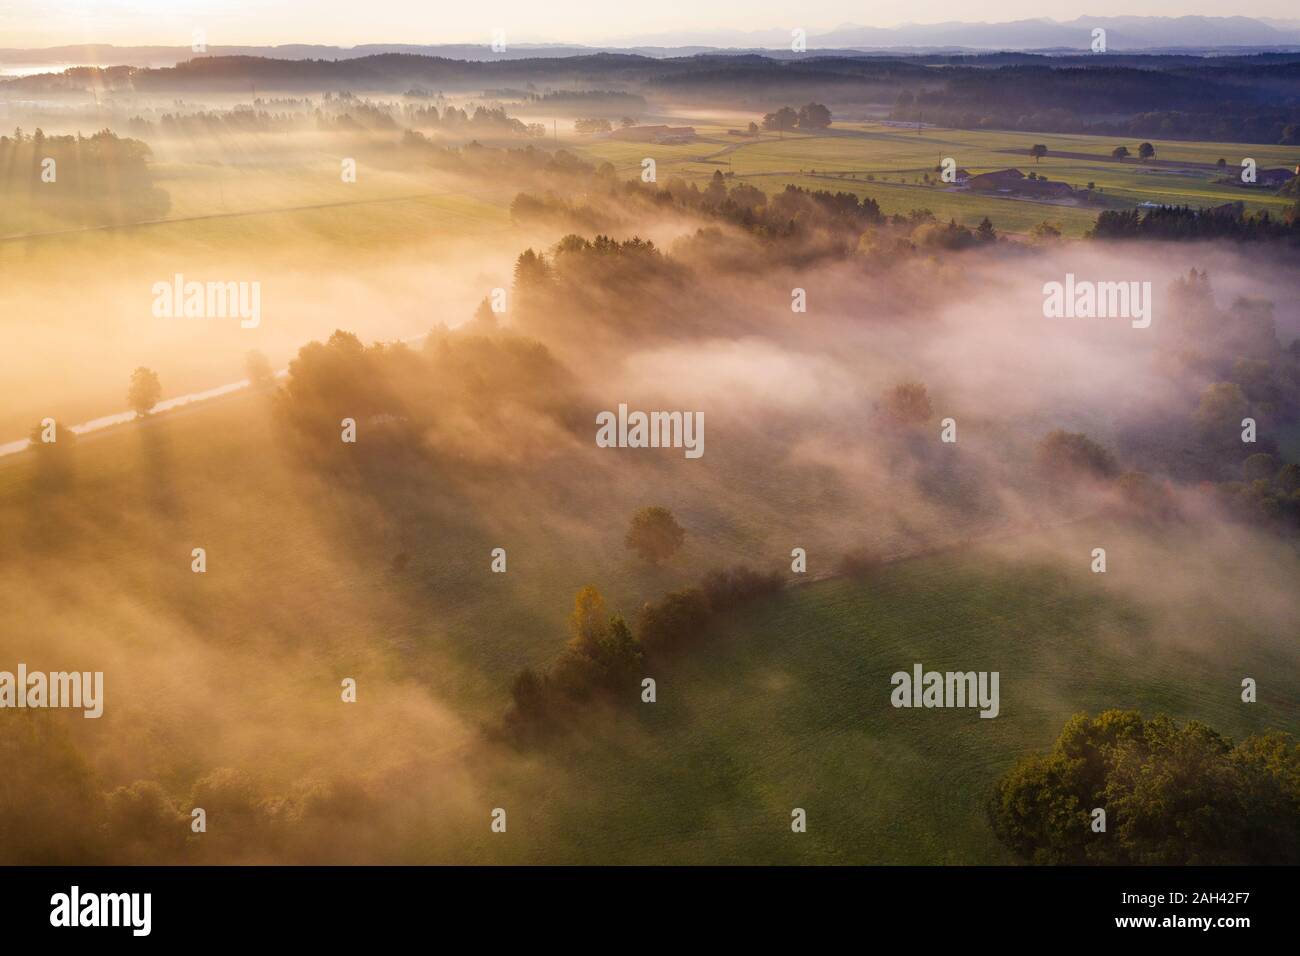 Germany, Bavaria, Geretsried, Aerial view of countryside shrouded in fog at sunrise Stock Photo